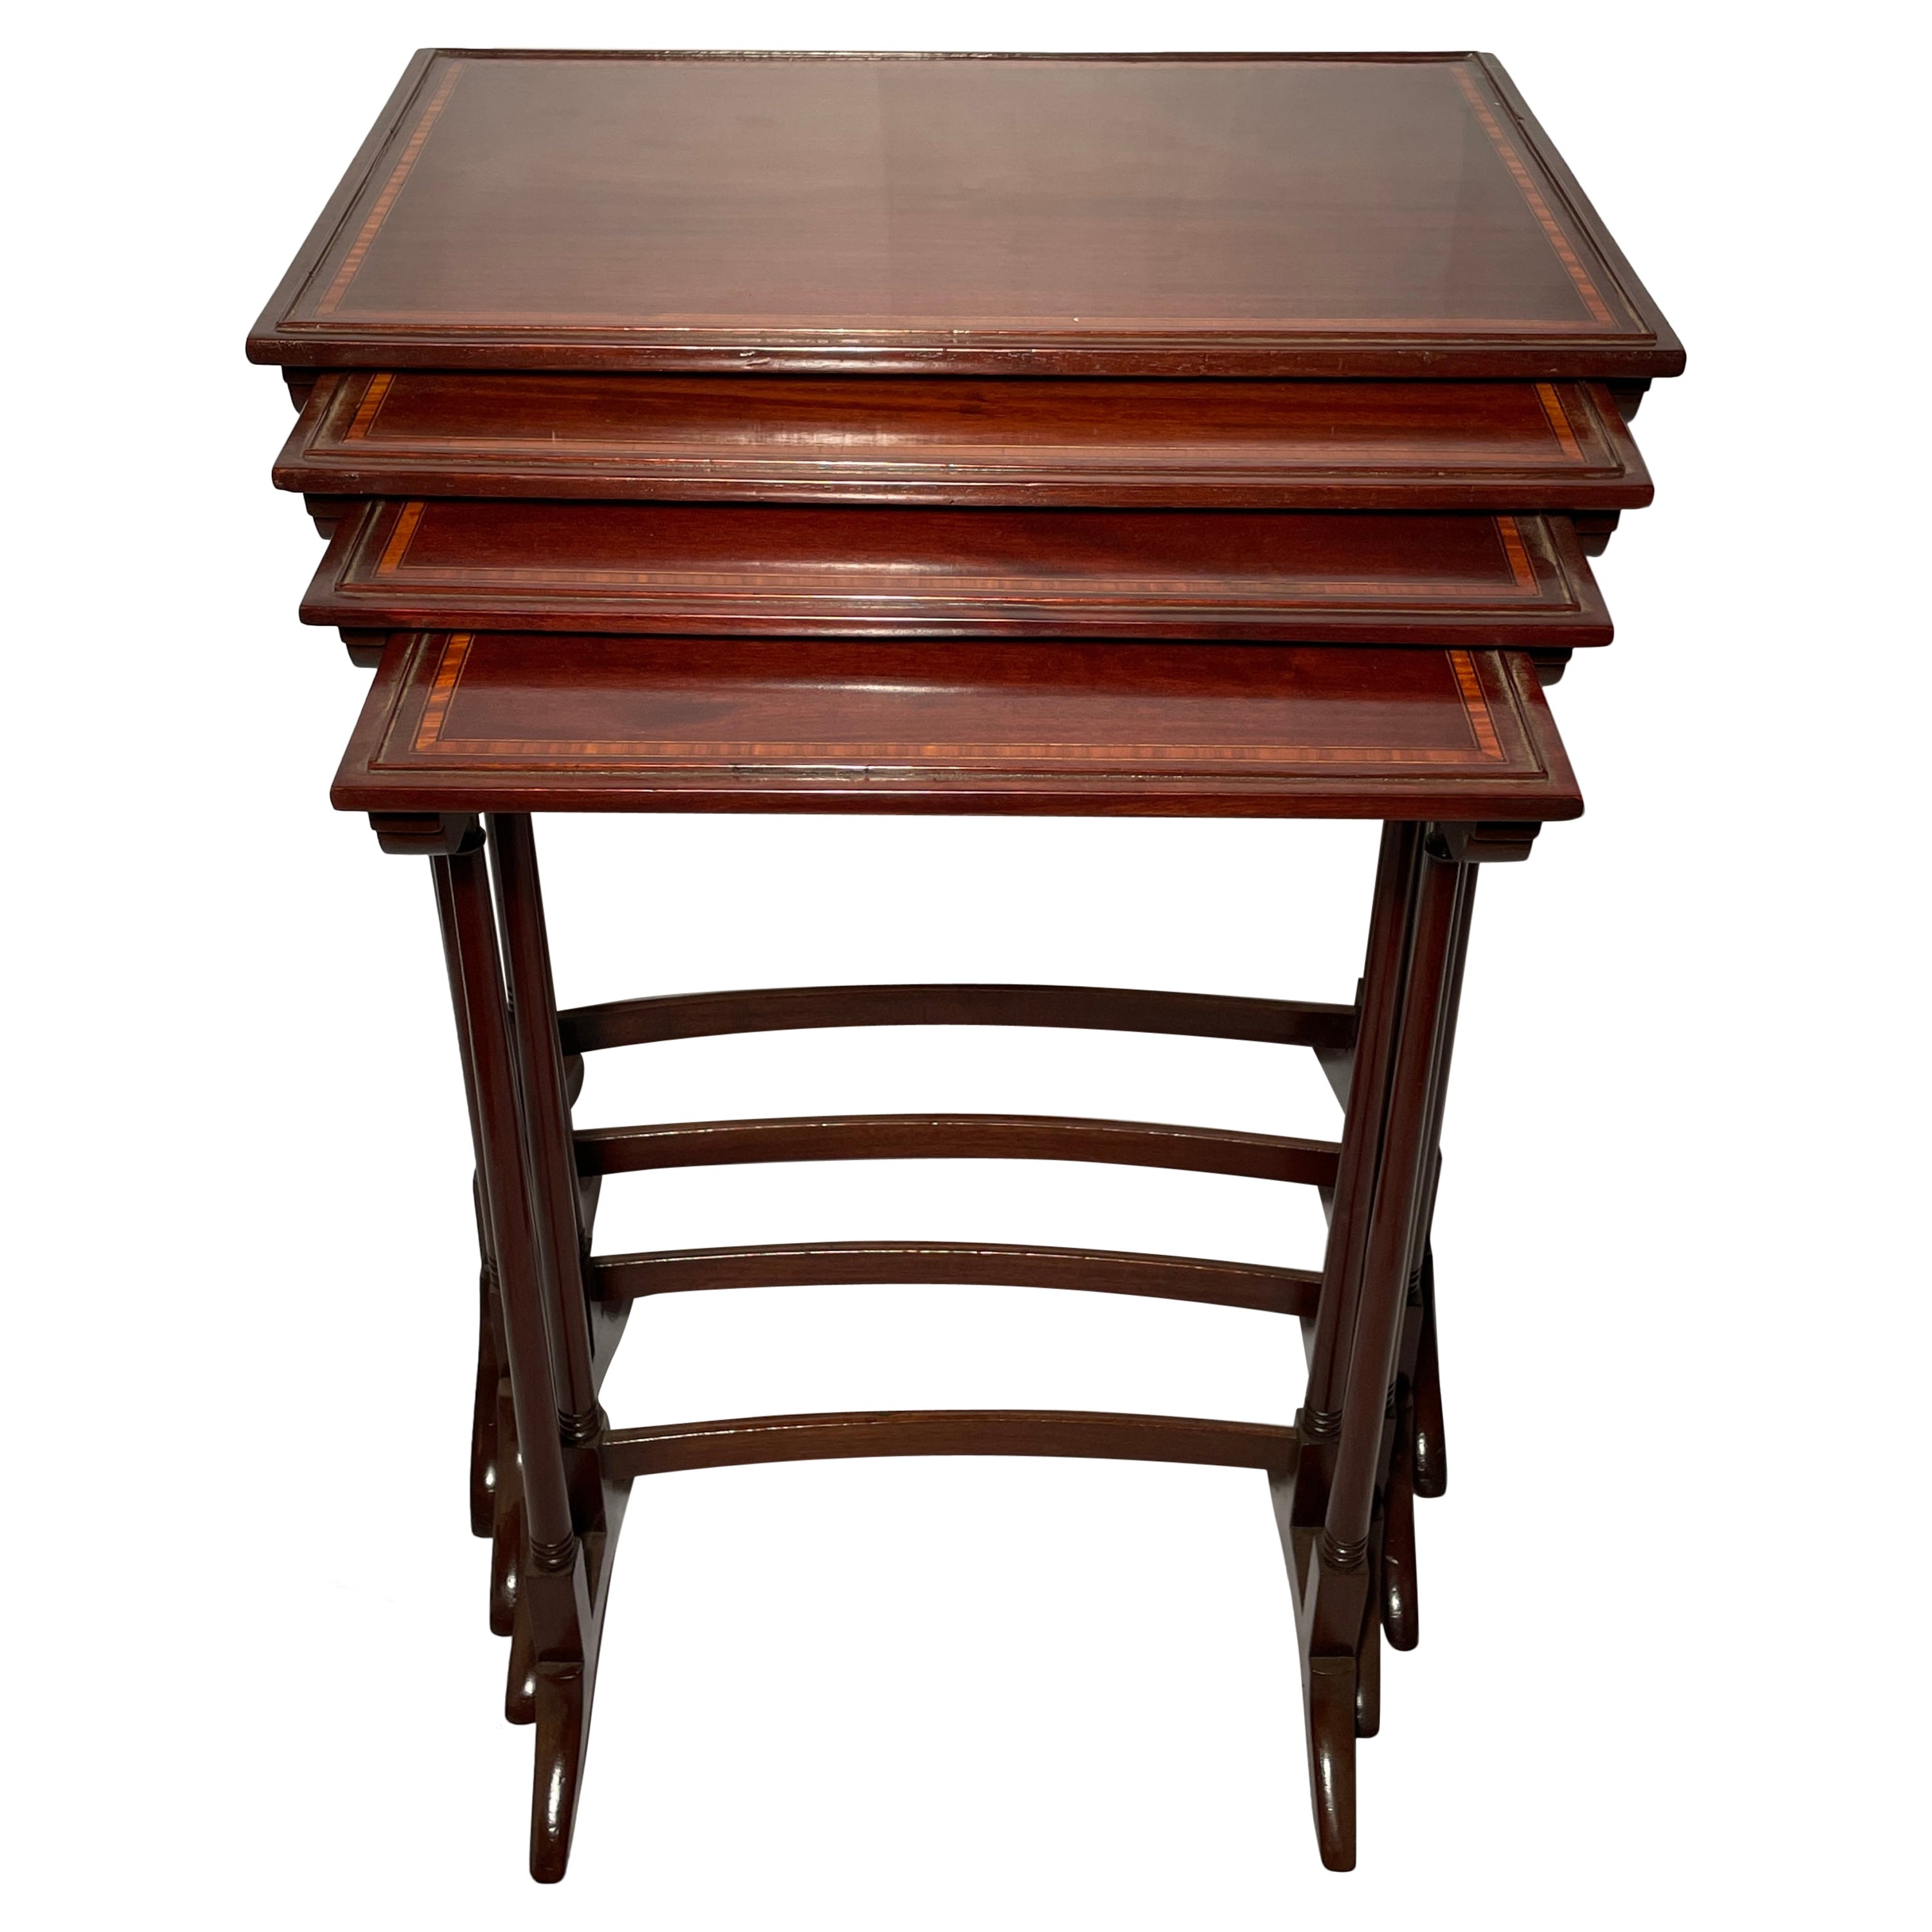 Antique English Mahogany and Satinwood Inlaid Nest of Tables, circa 1880 For Sale